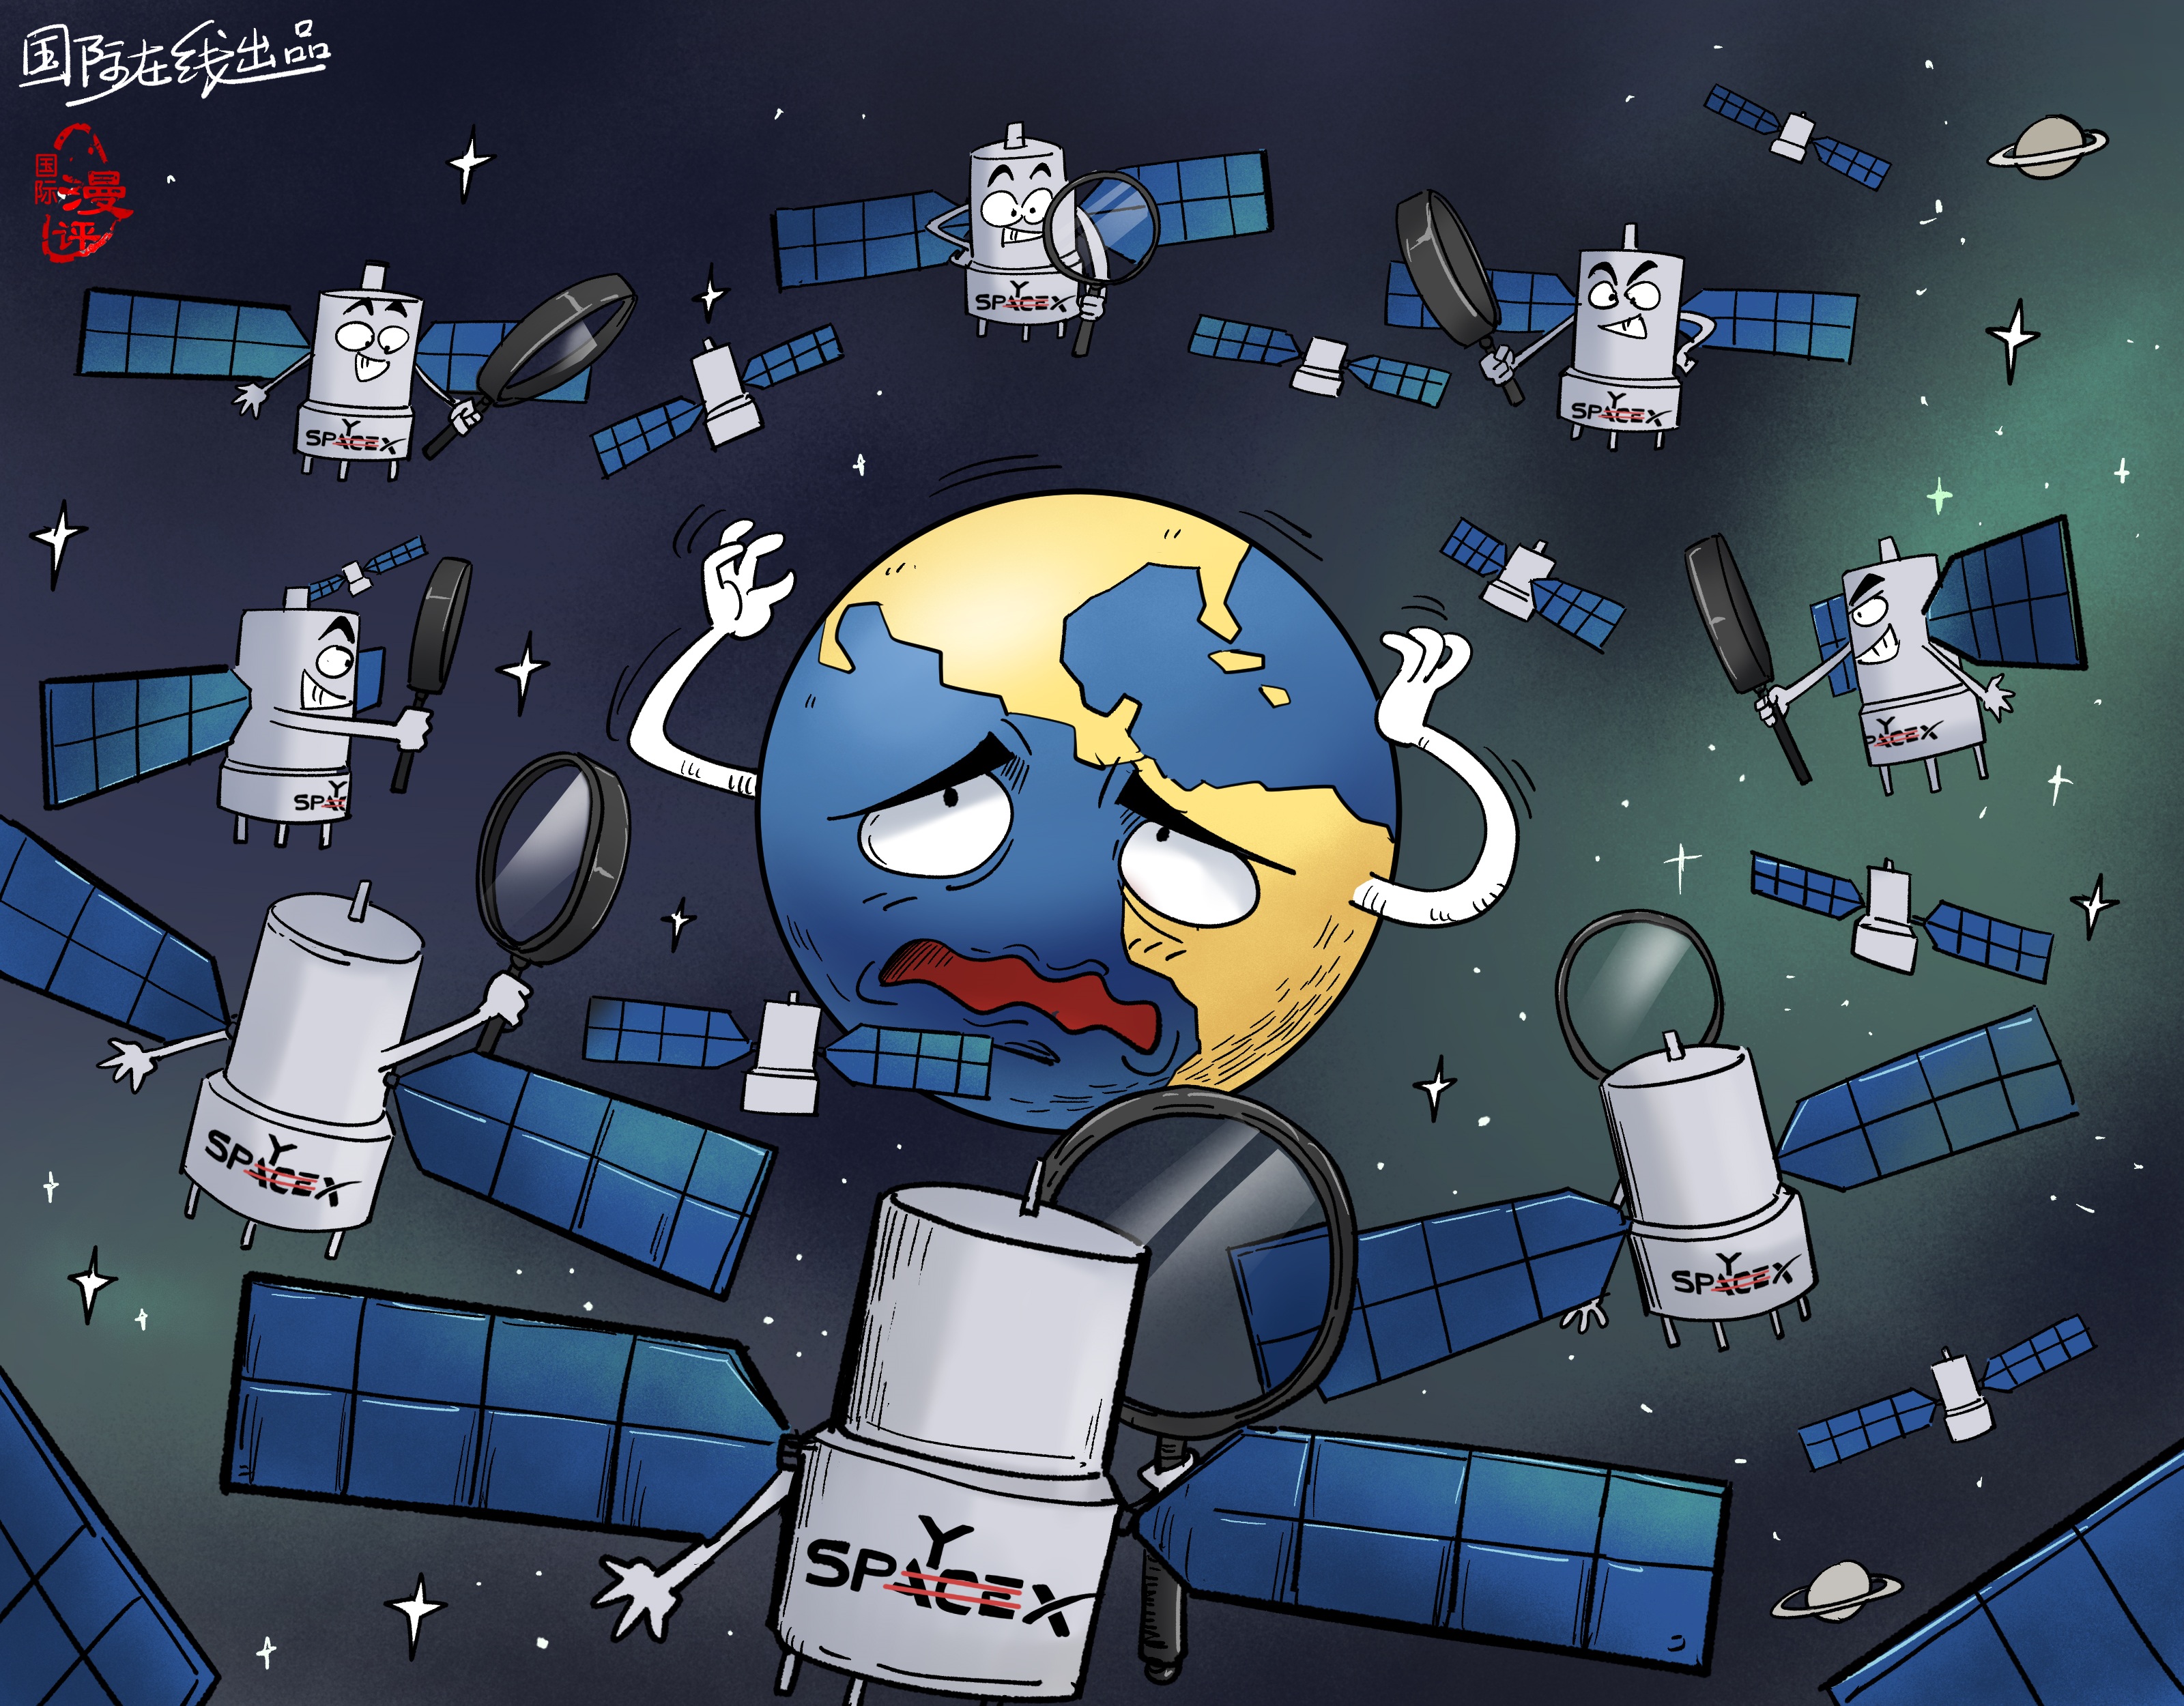 【Caricatura editorial】¿SpaceX o SpyX?_fororder_9709e476-9d2a-4aff-a874-ee610df7dc49